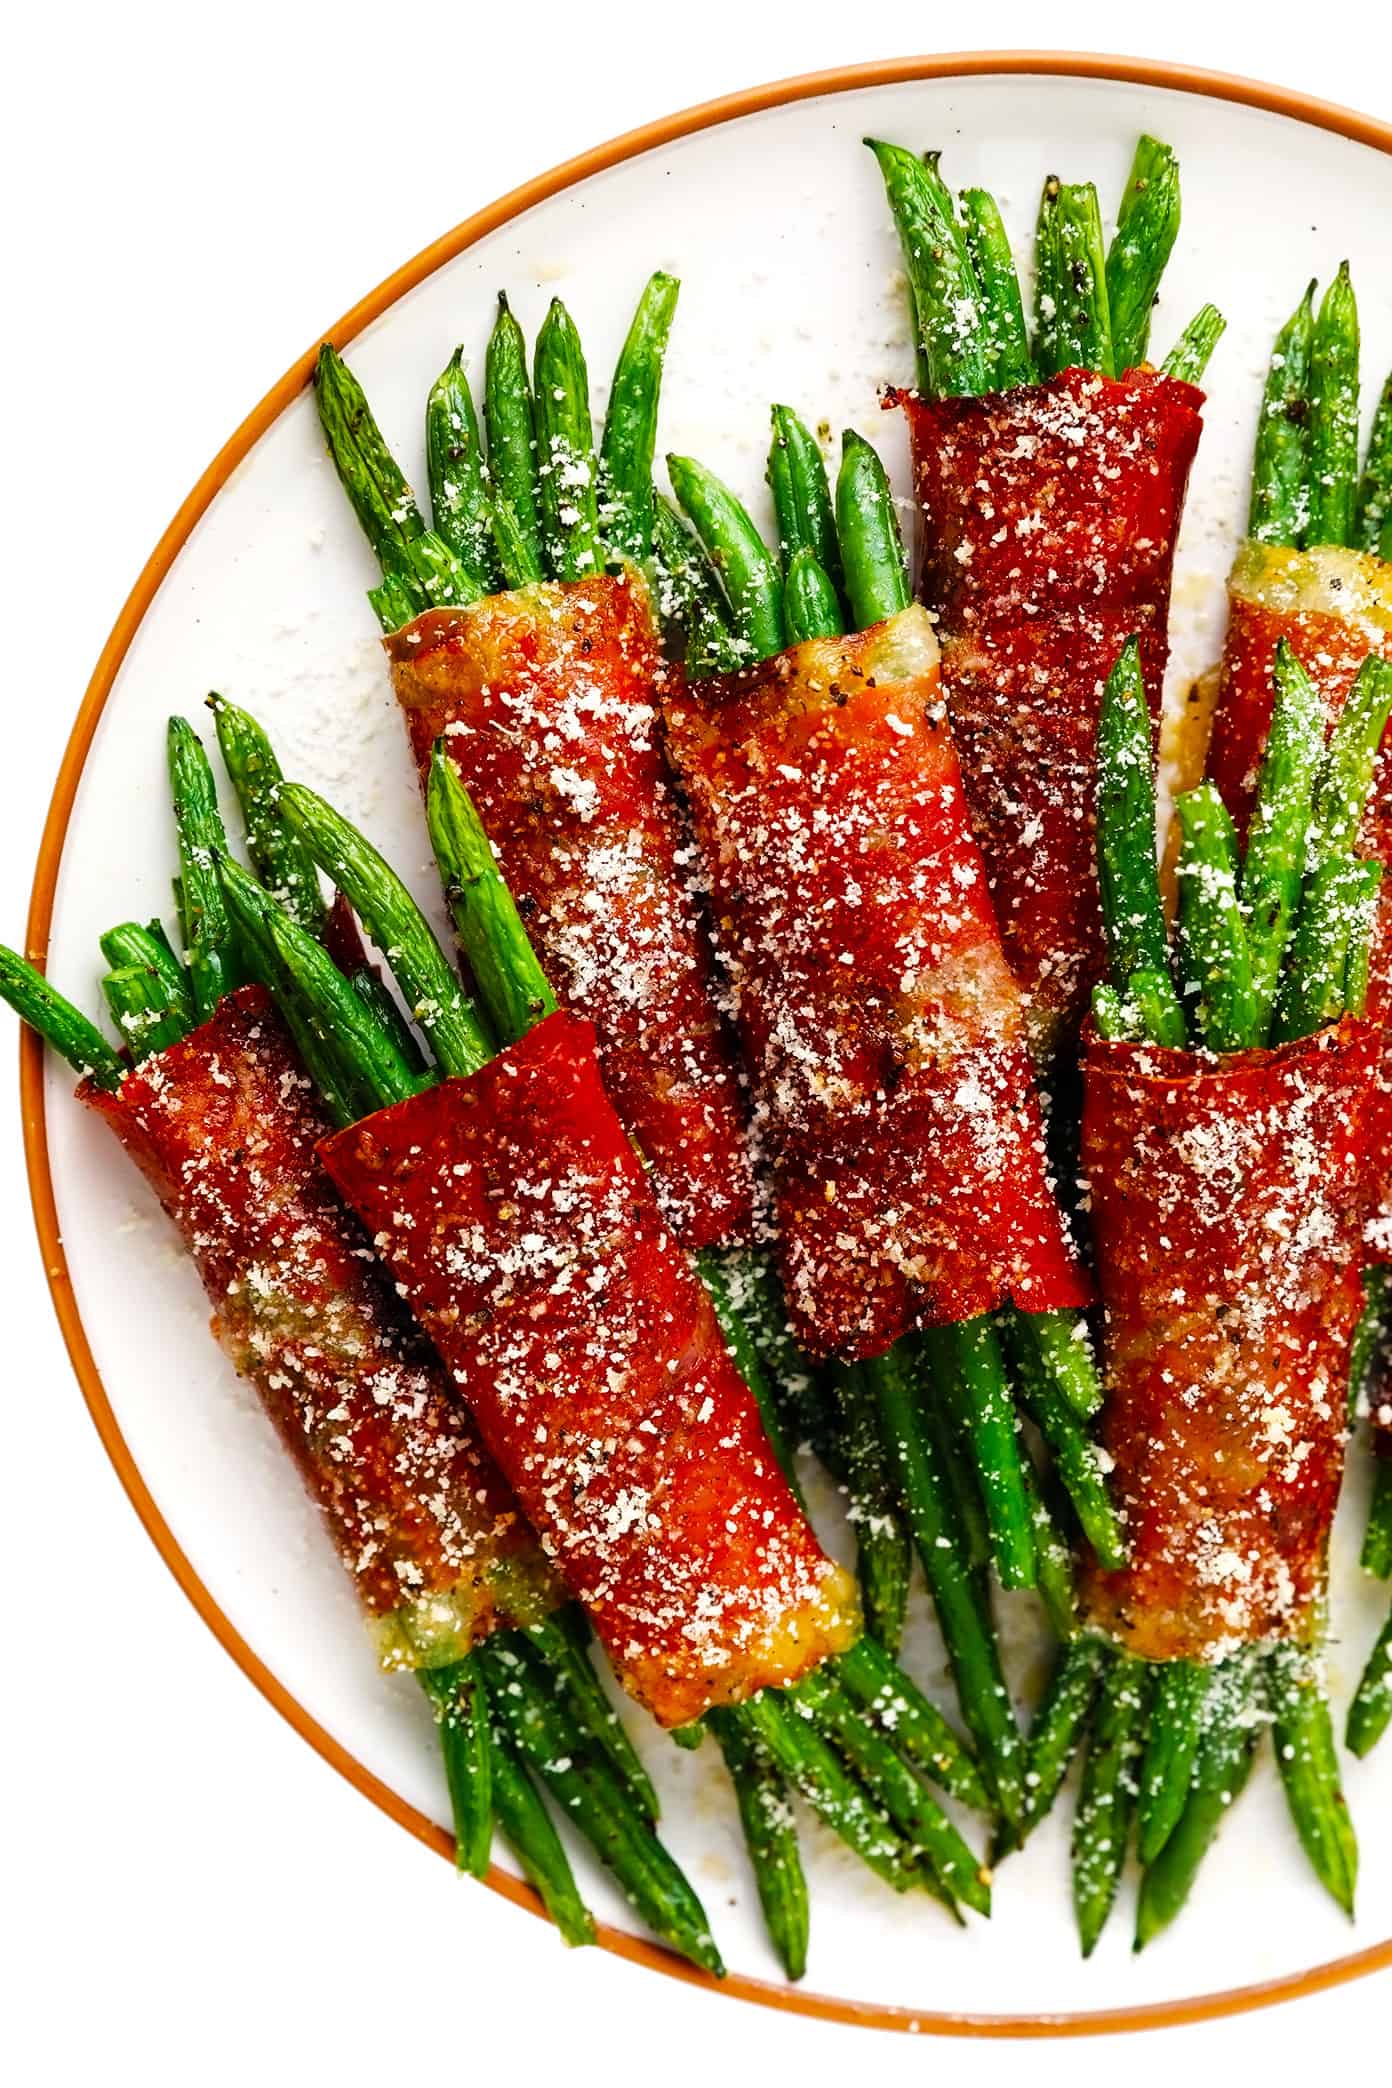 Roasted Green Bean Bundles with Prosciutto on Serving Plate